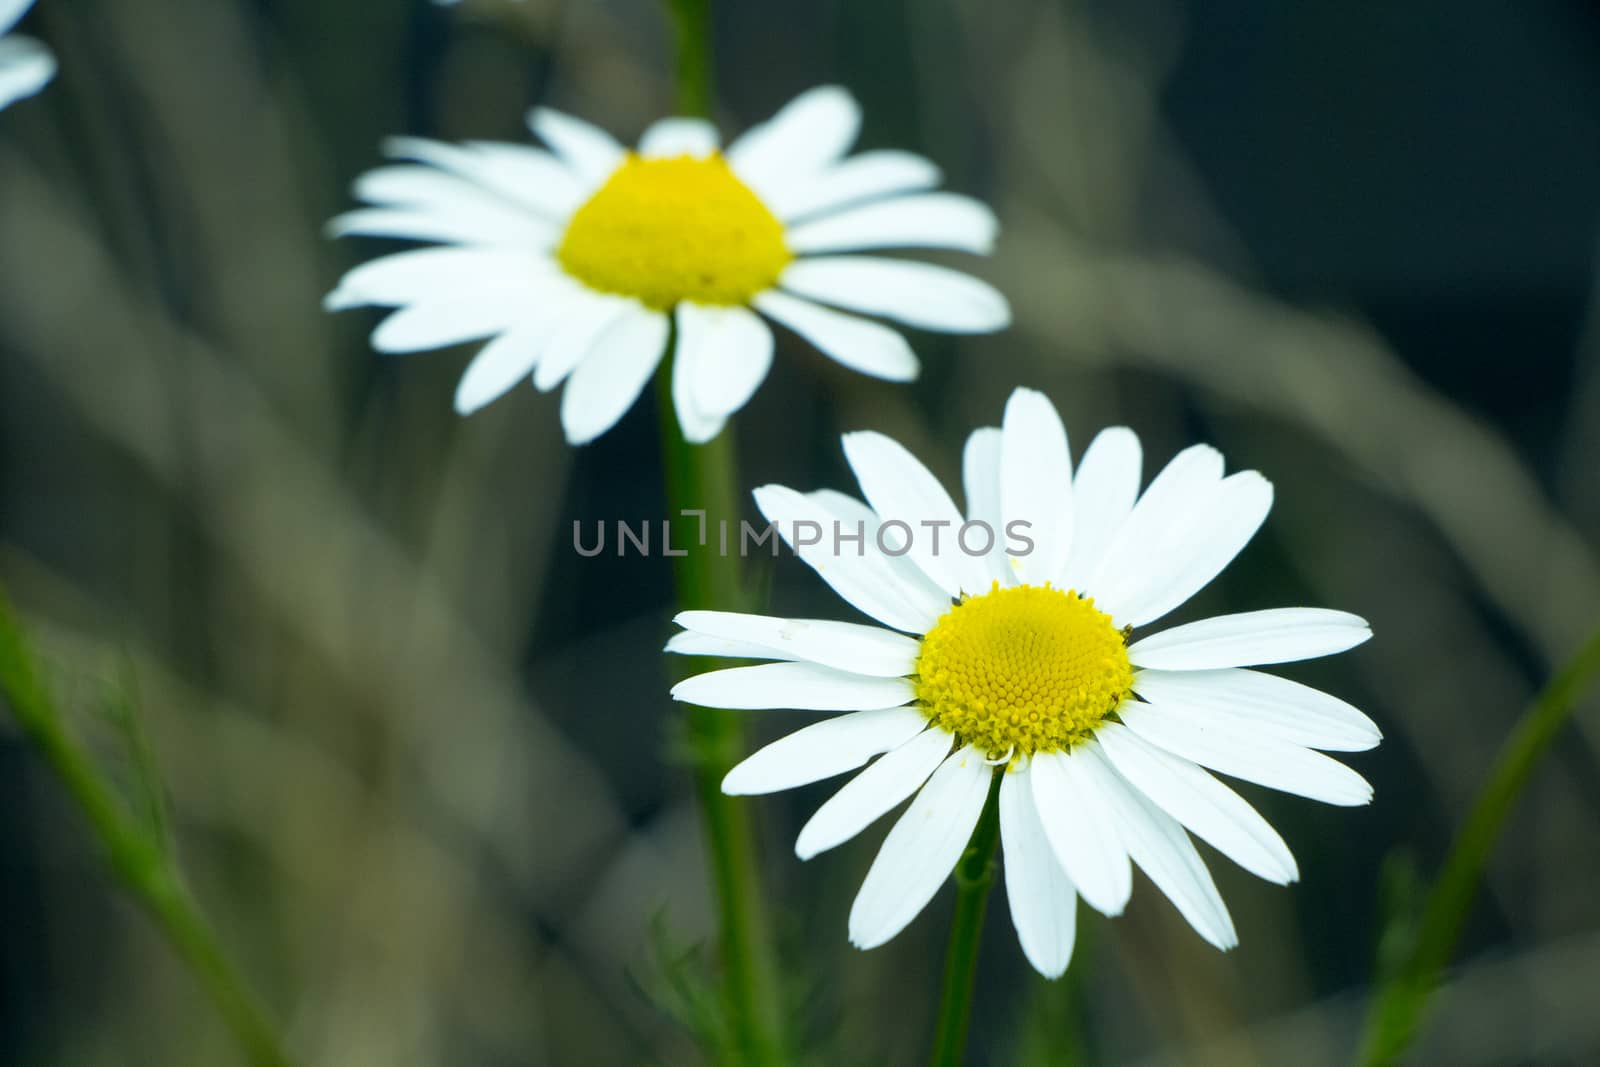 Small white and yellow flowers on a sunny day in autumn.